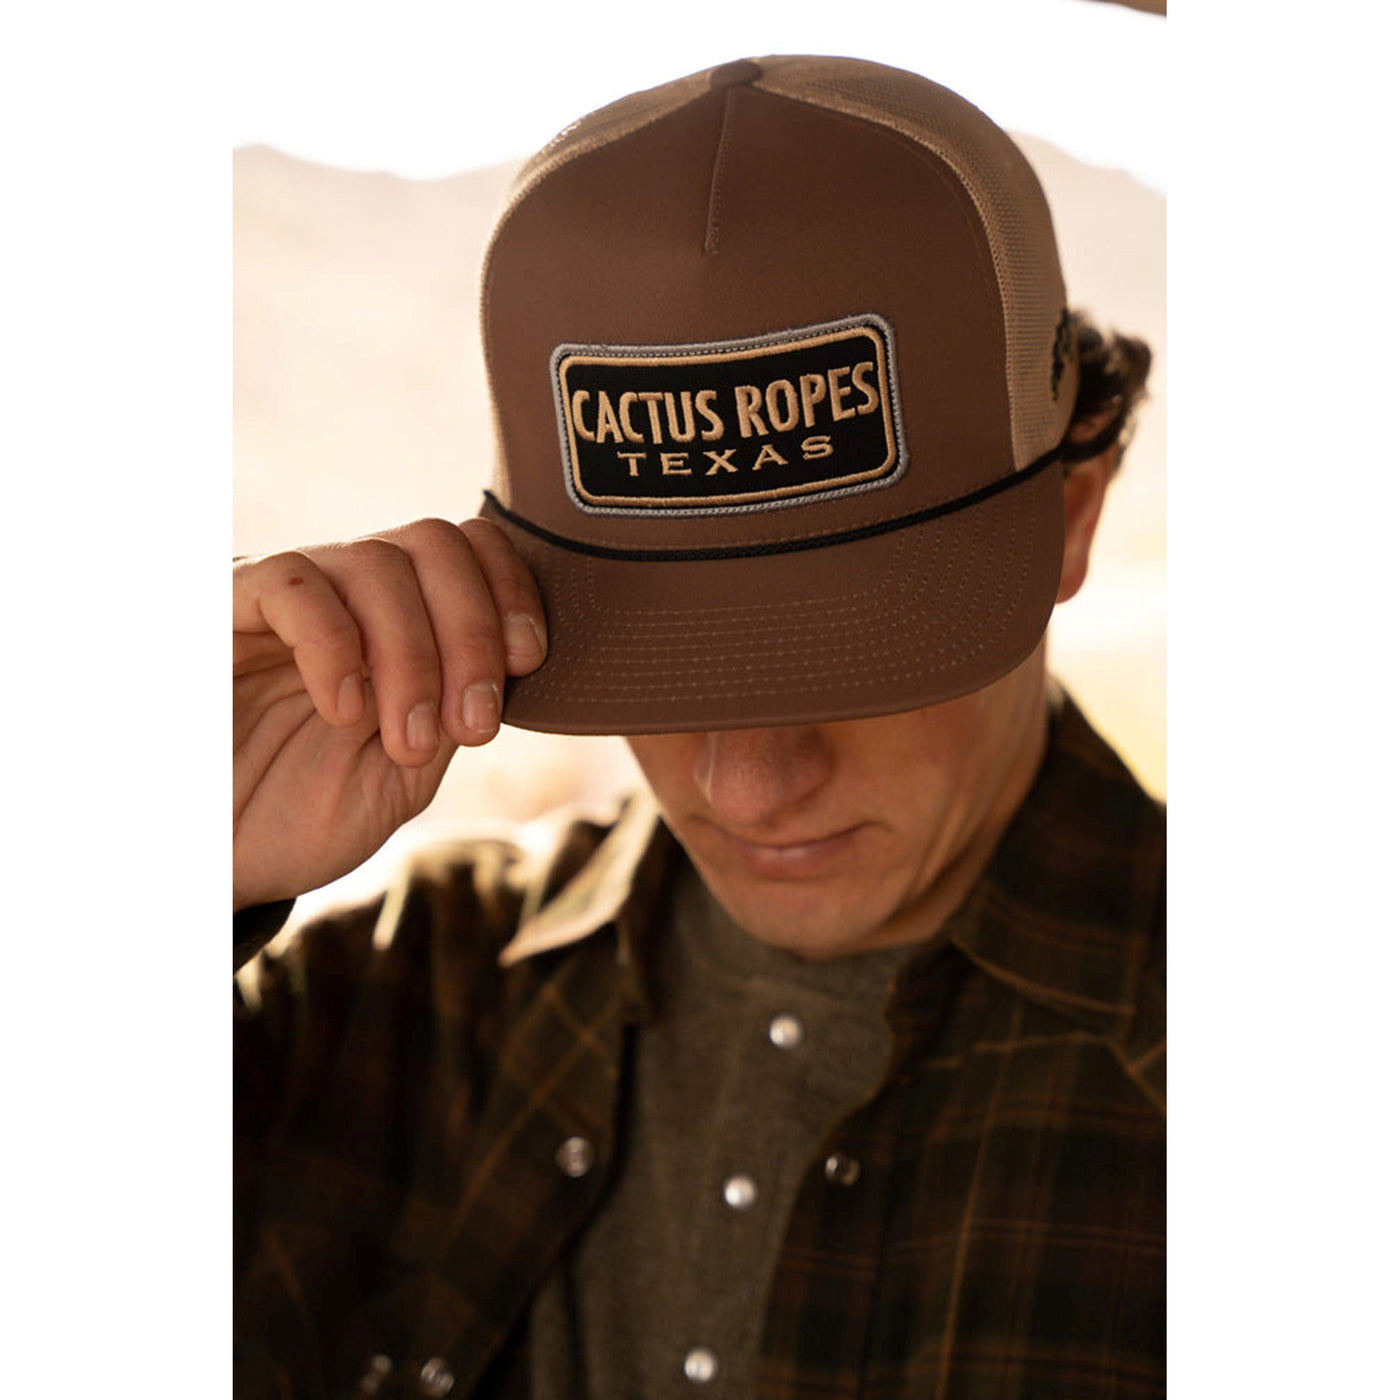 Hooey Brown and Tan Cactus Ropes Hat